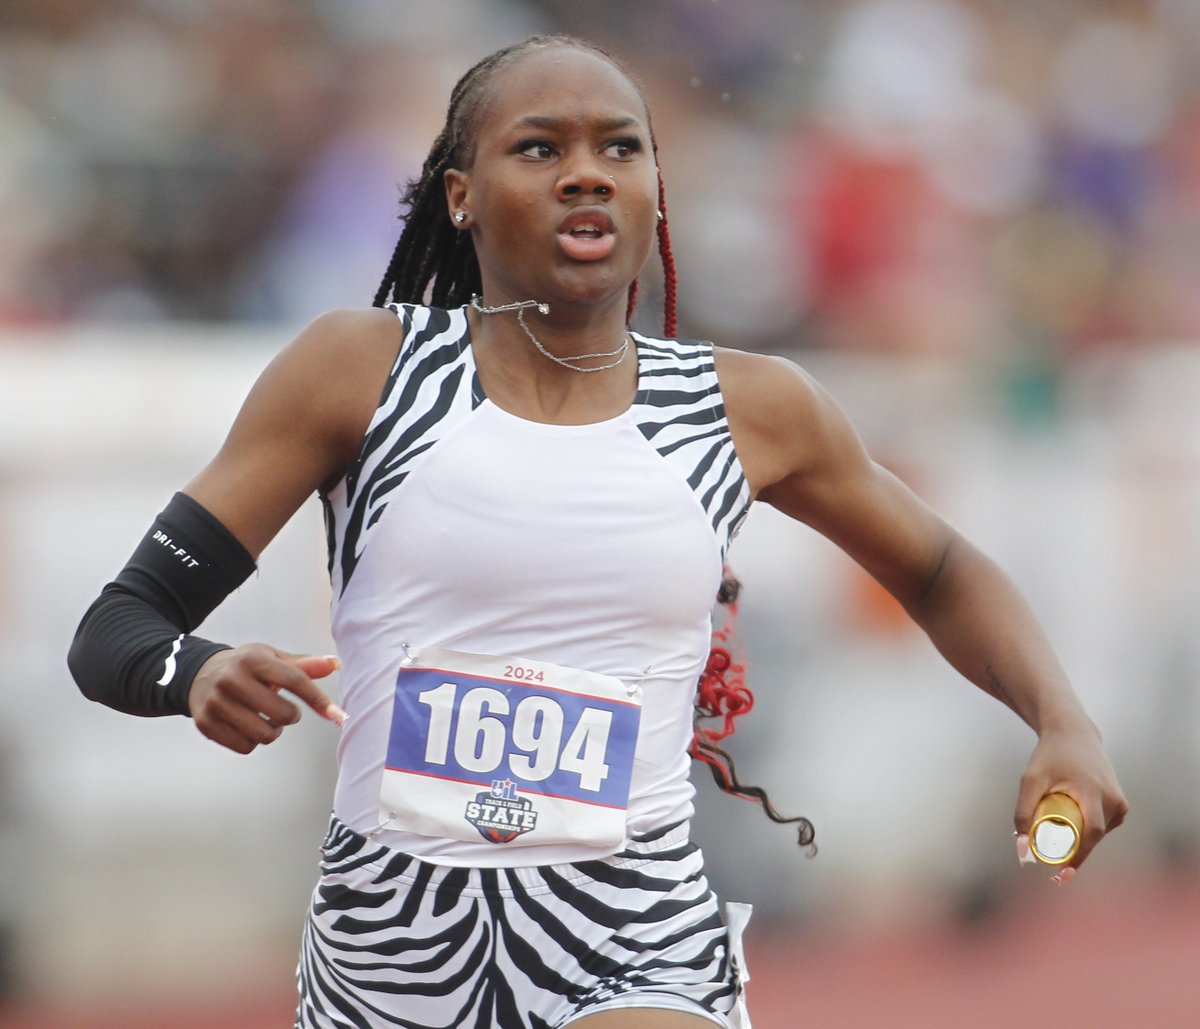 🎽 Dallas-area athletes won 36 state titles in track Lancaster’s Saniyah Miller won three Class 5A state titles, winning the 200 meters in 23.52 — the 15th-best time in the nation — and helping Lancaster win the 4x100 and 4x400 relays Full story 👇dallasnews.com/high-school-sp…